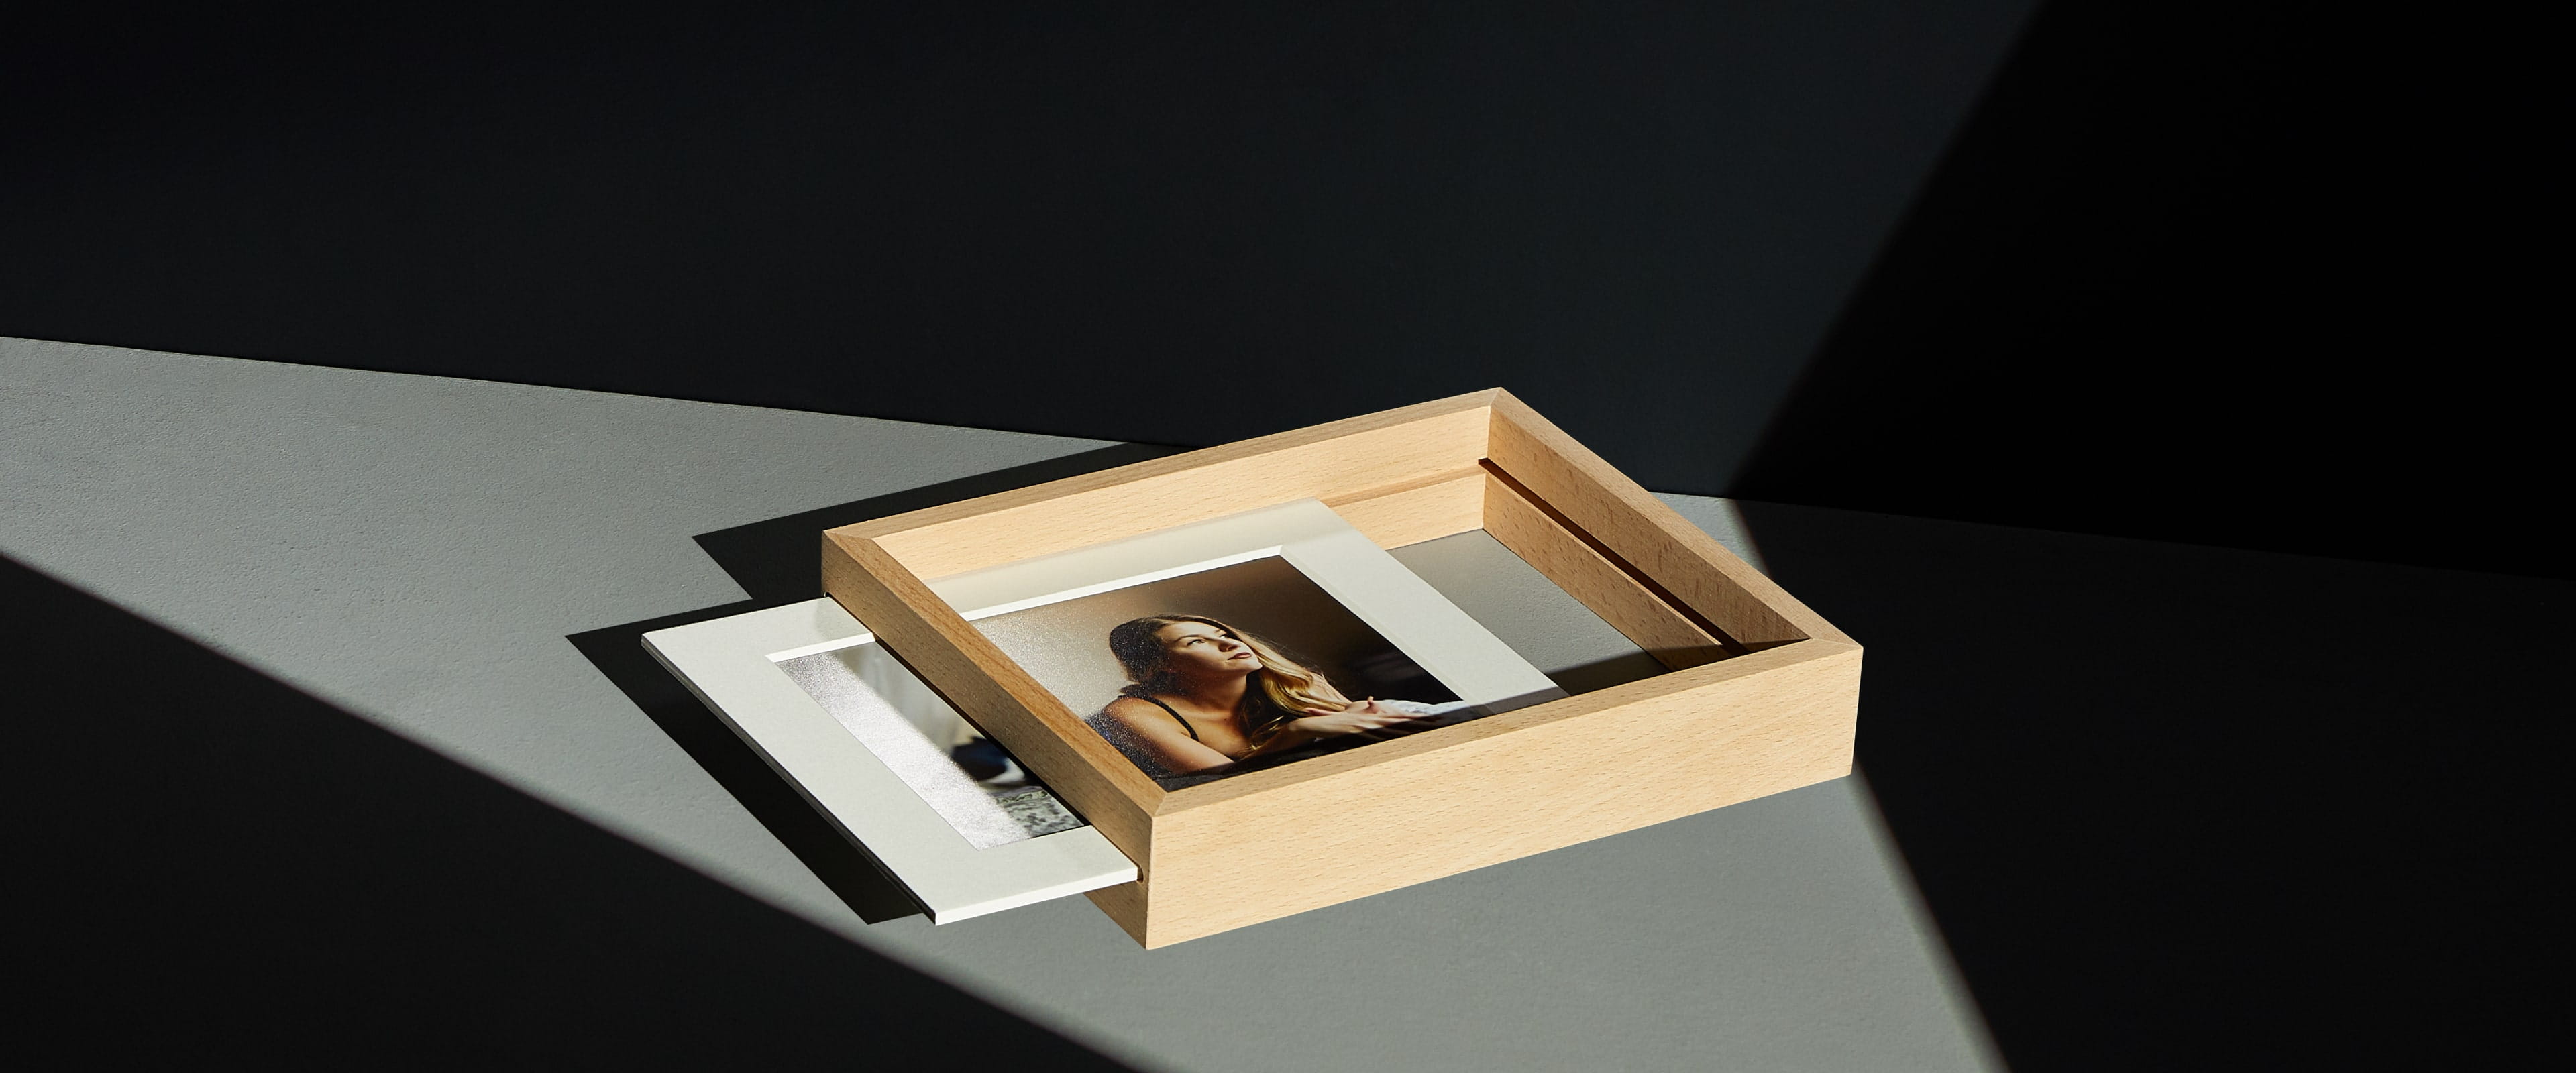 a slide-in print stand on white table showing a matted print sliding out